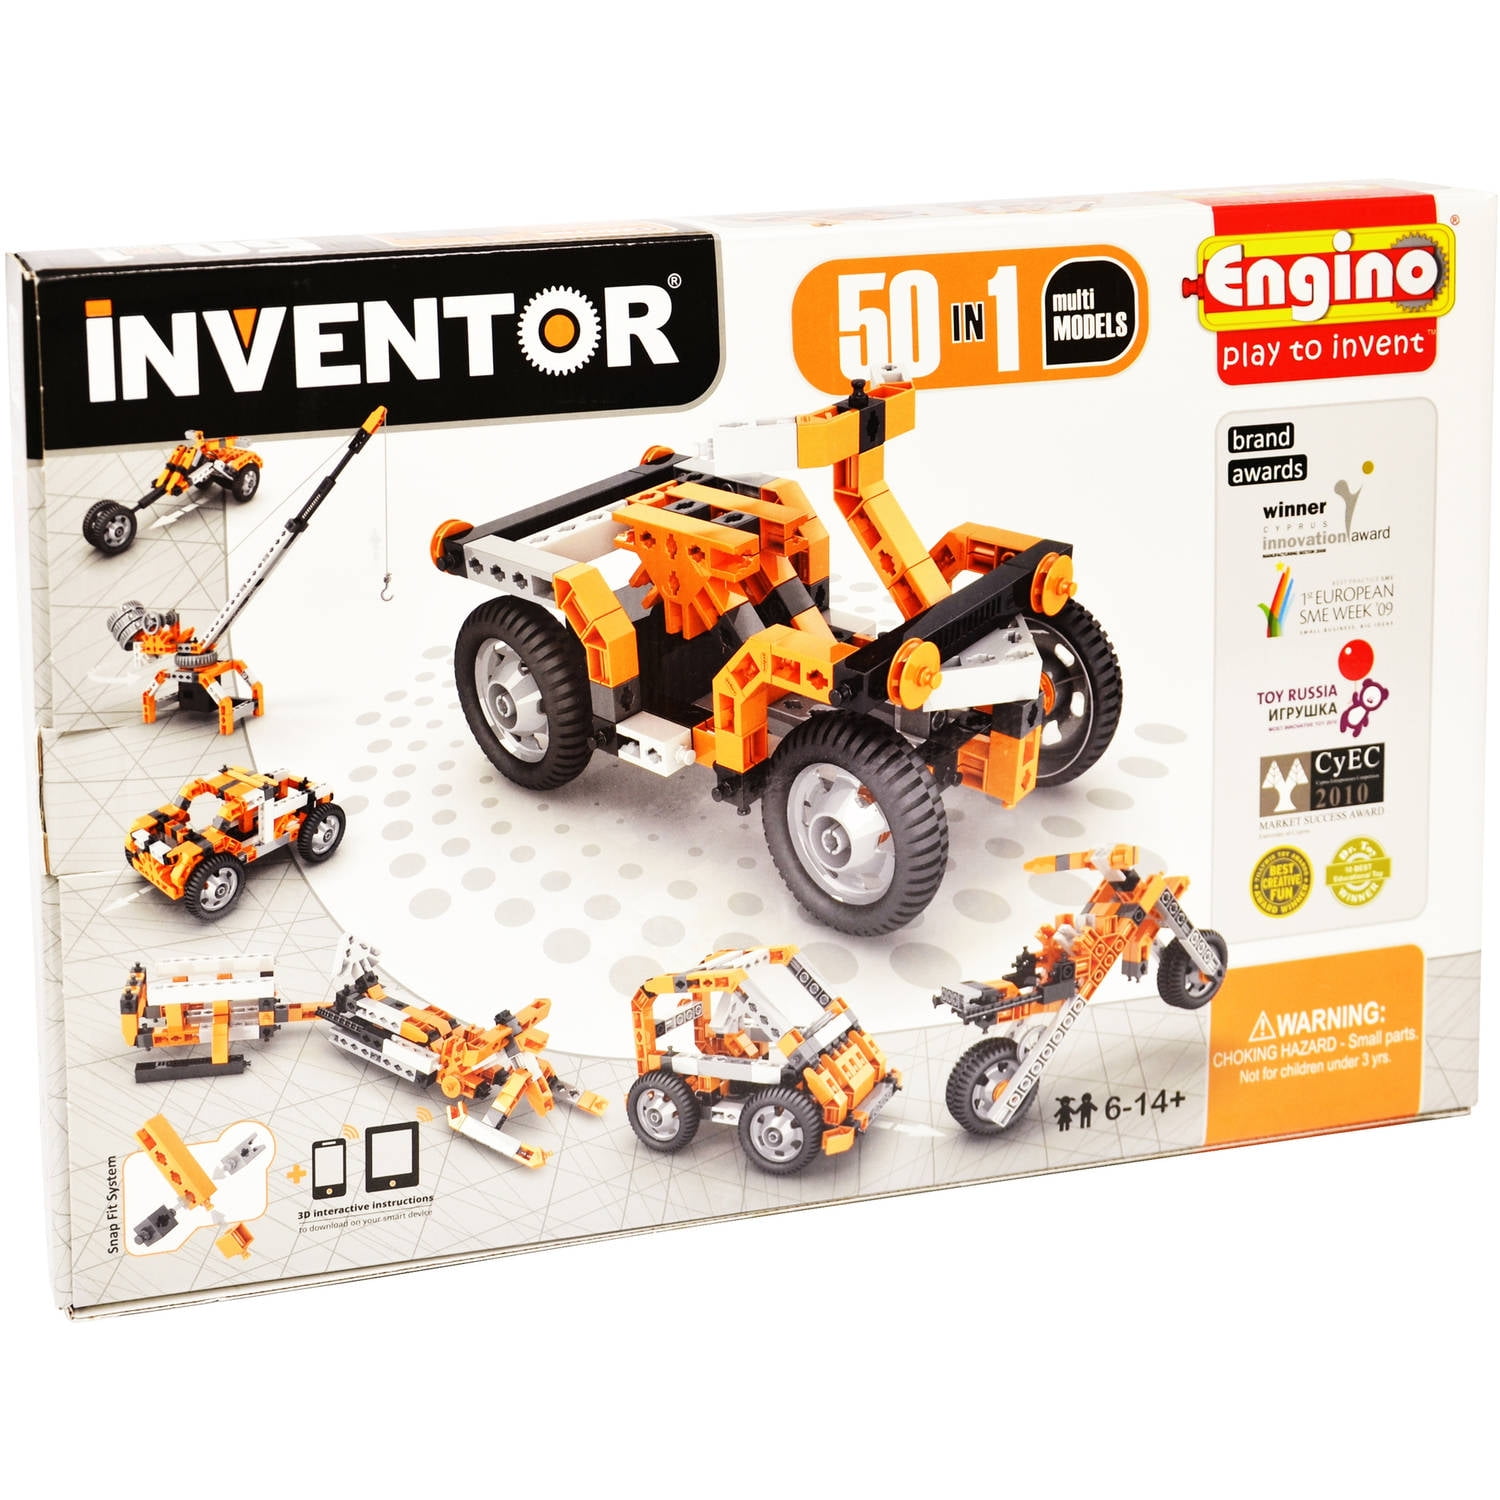 ENGINO Invento Motorized ENG-5030 Building Set (200 Pieces)